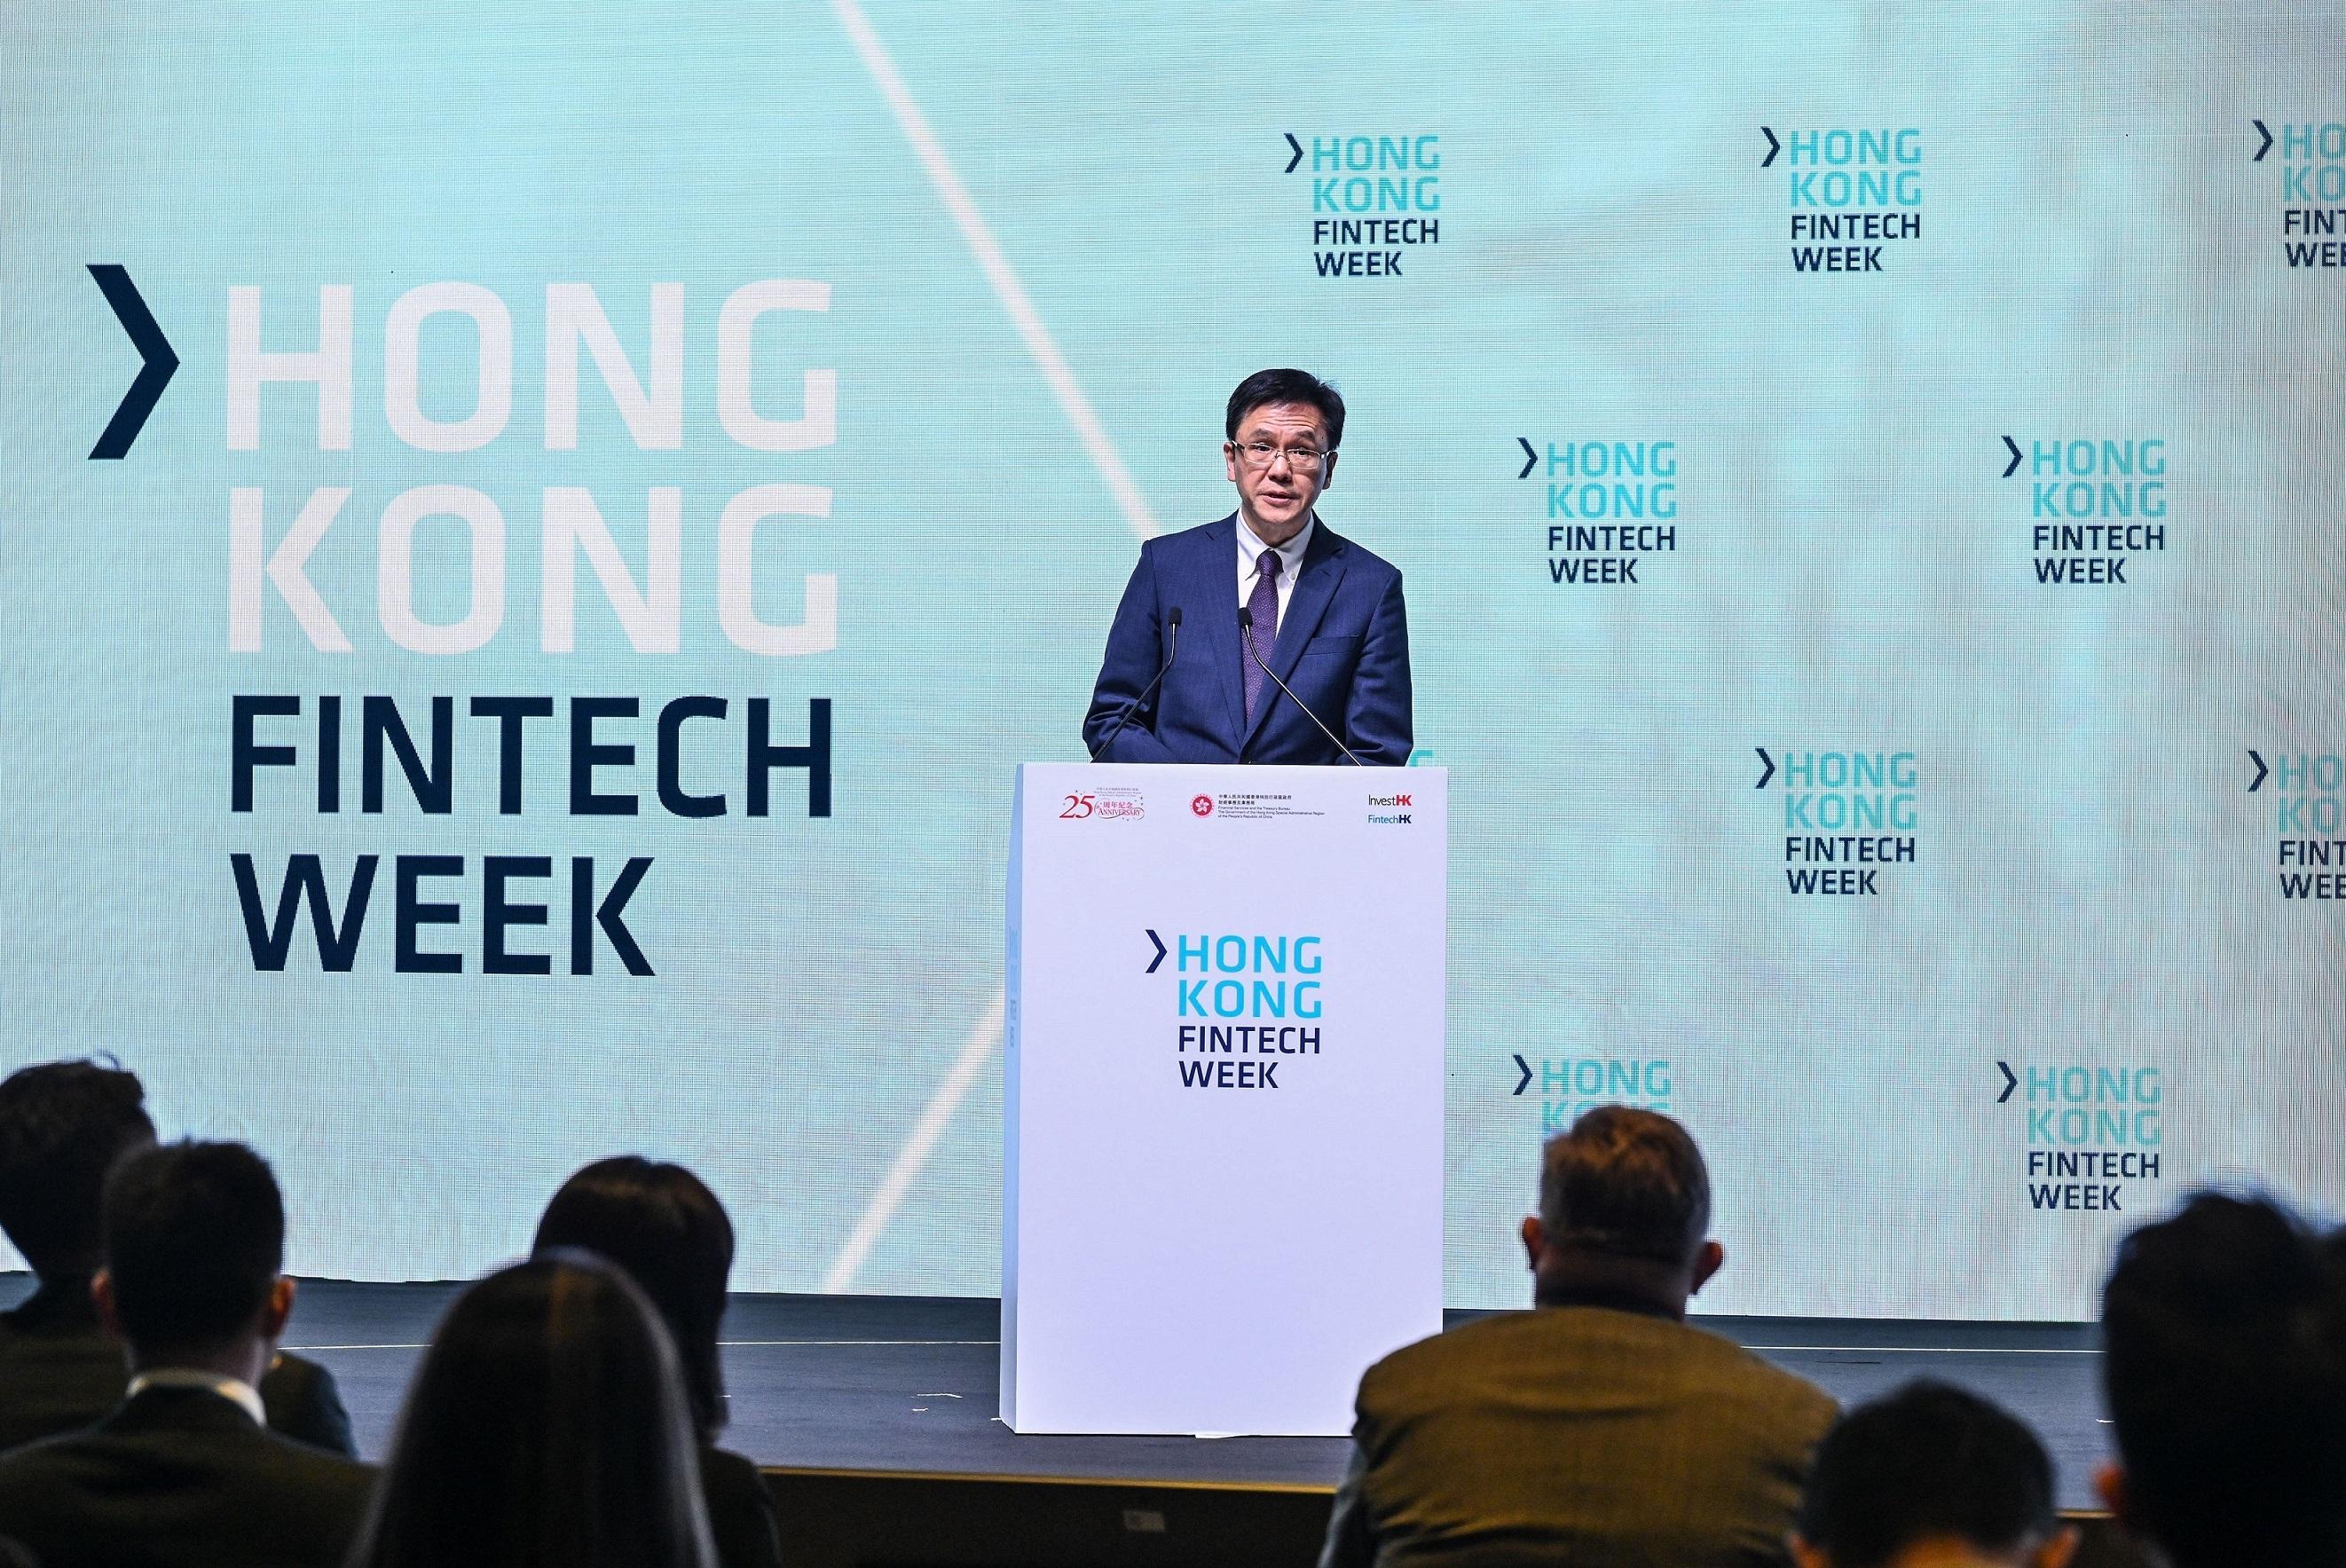 The five-day Hong Kong FinTech Week 2022 attracted over 30 000 visitors and more than five million online views from over 95 economies. Photo shows the Secretary for Innovation, Technology and Industry, Professor Sun Dong, sharing keynote remarks on November 1, in which he highlighted Hong Kong’s major strides in core technology development.